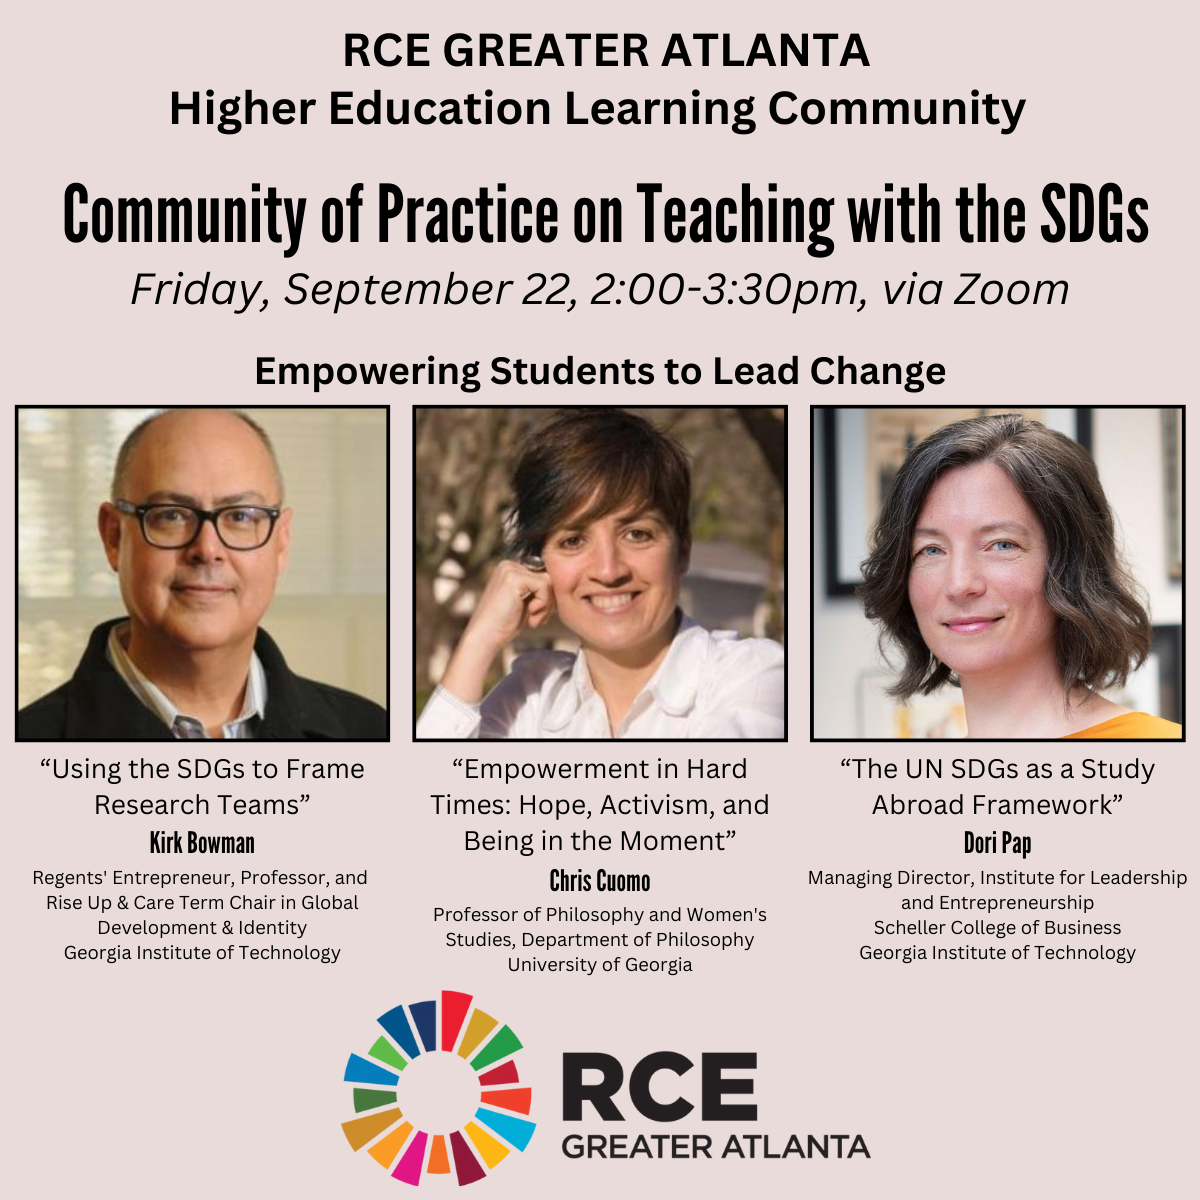 Community of Practice on Teaching with the SDGs: Empowering Students to Lead Change